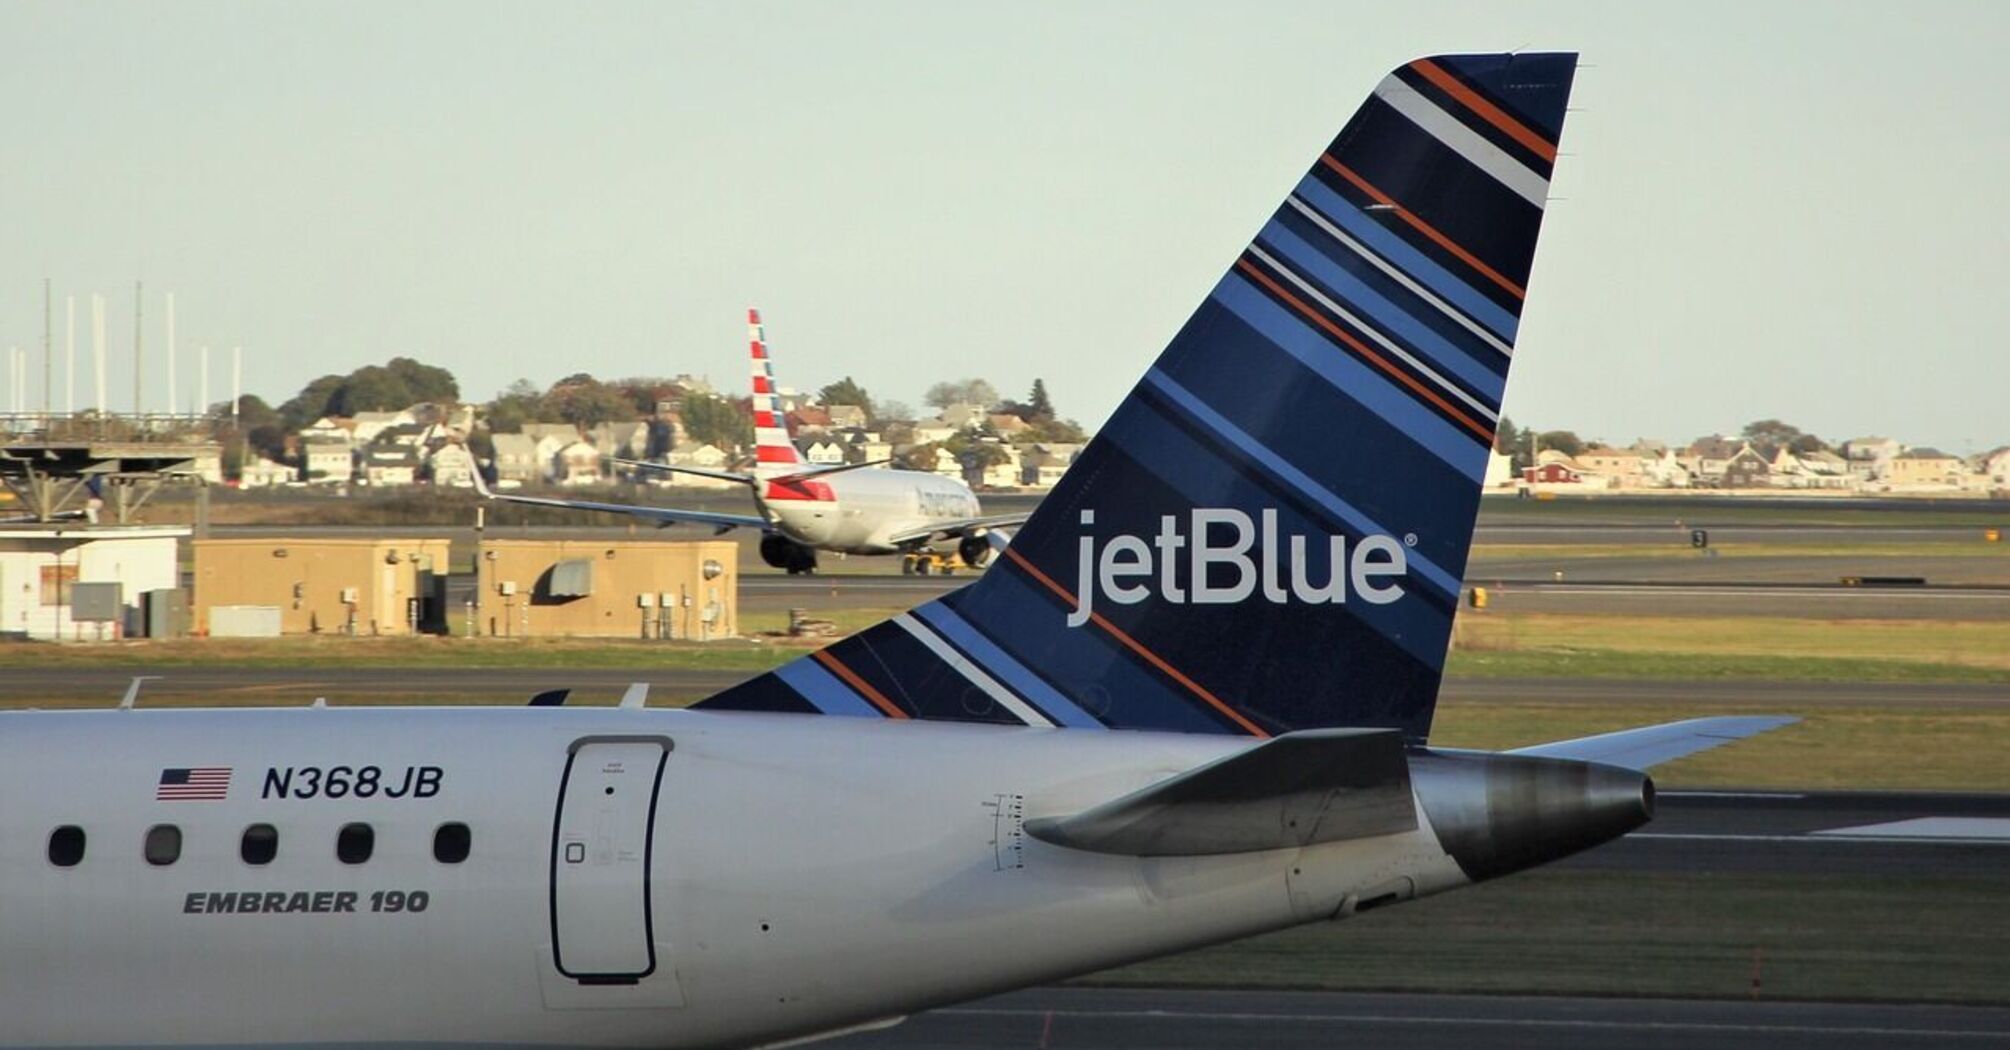 Two JetBlue passenger planes collided on the runway